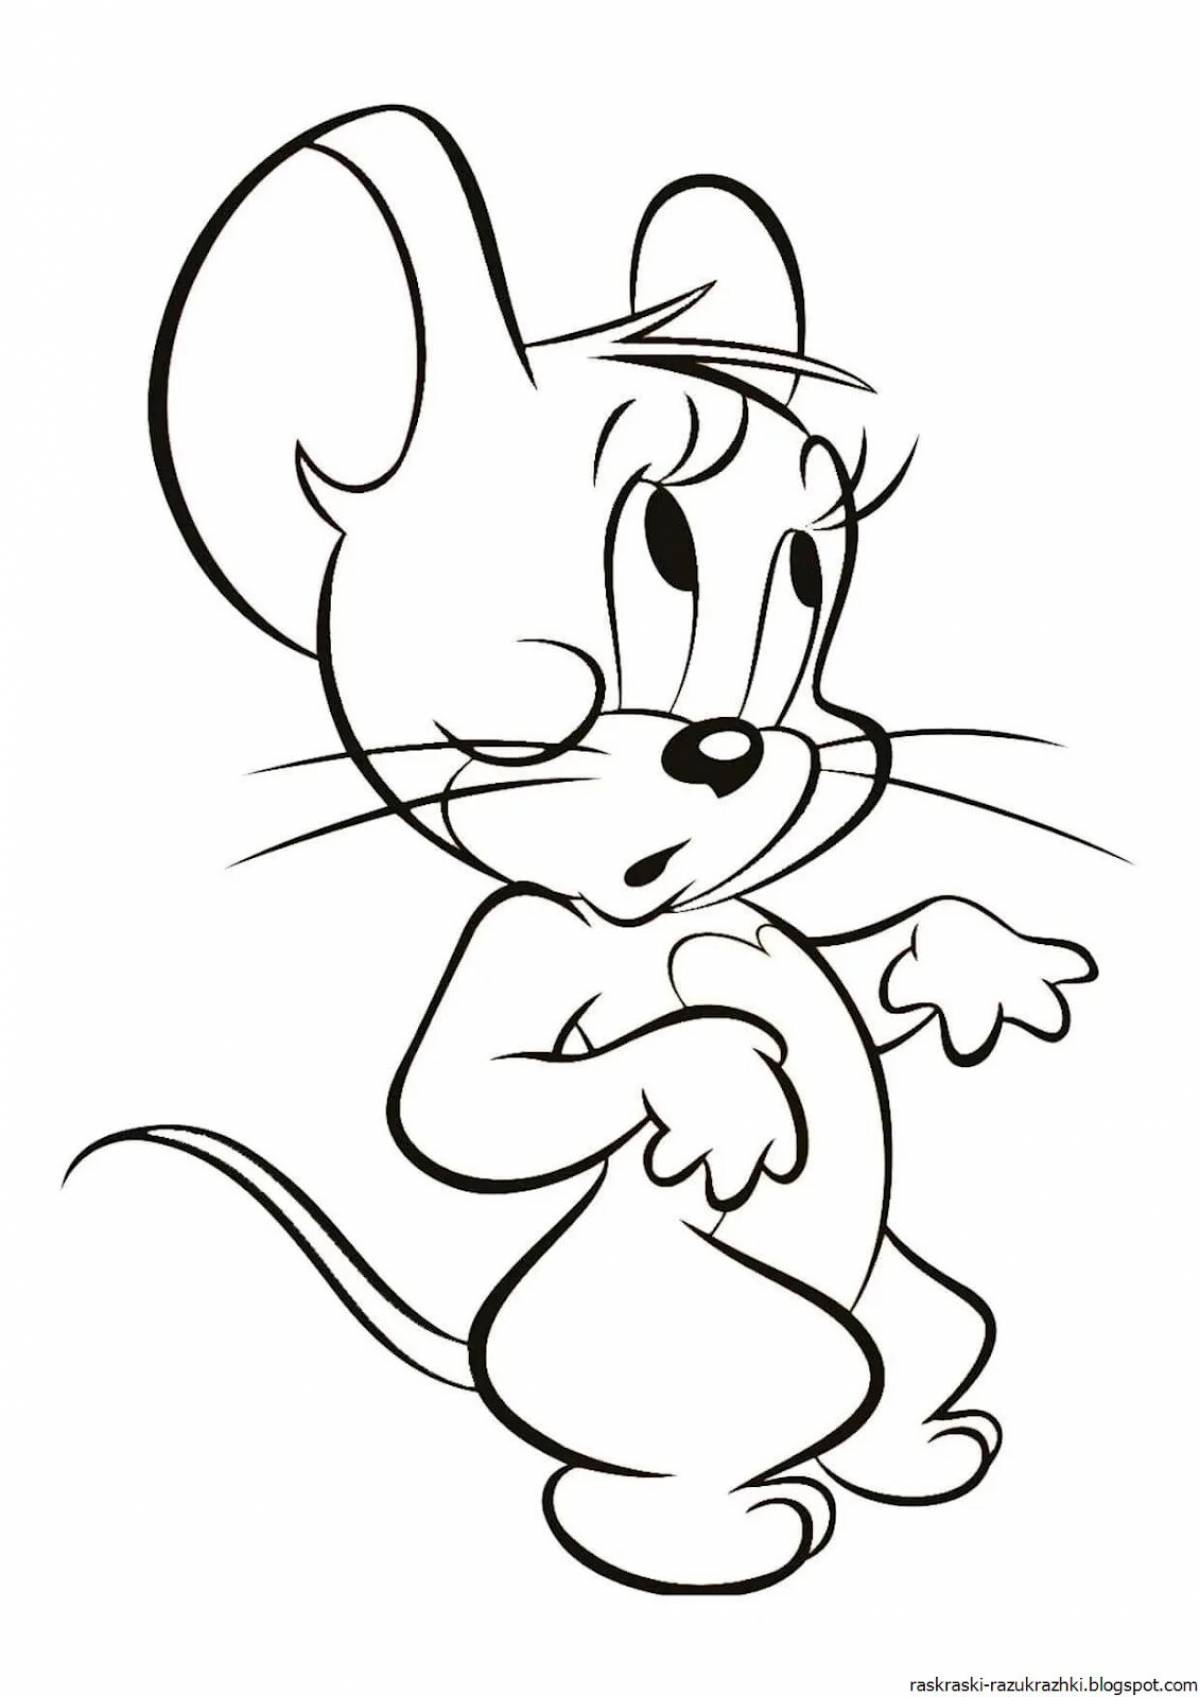 Creative mouse drawing